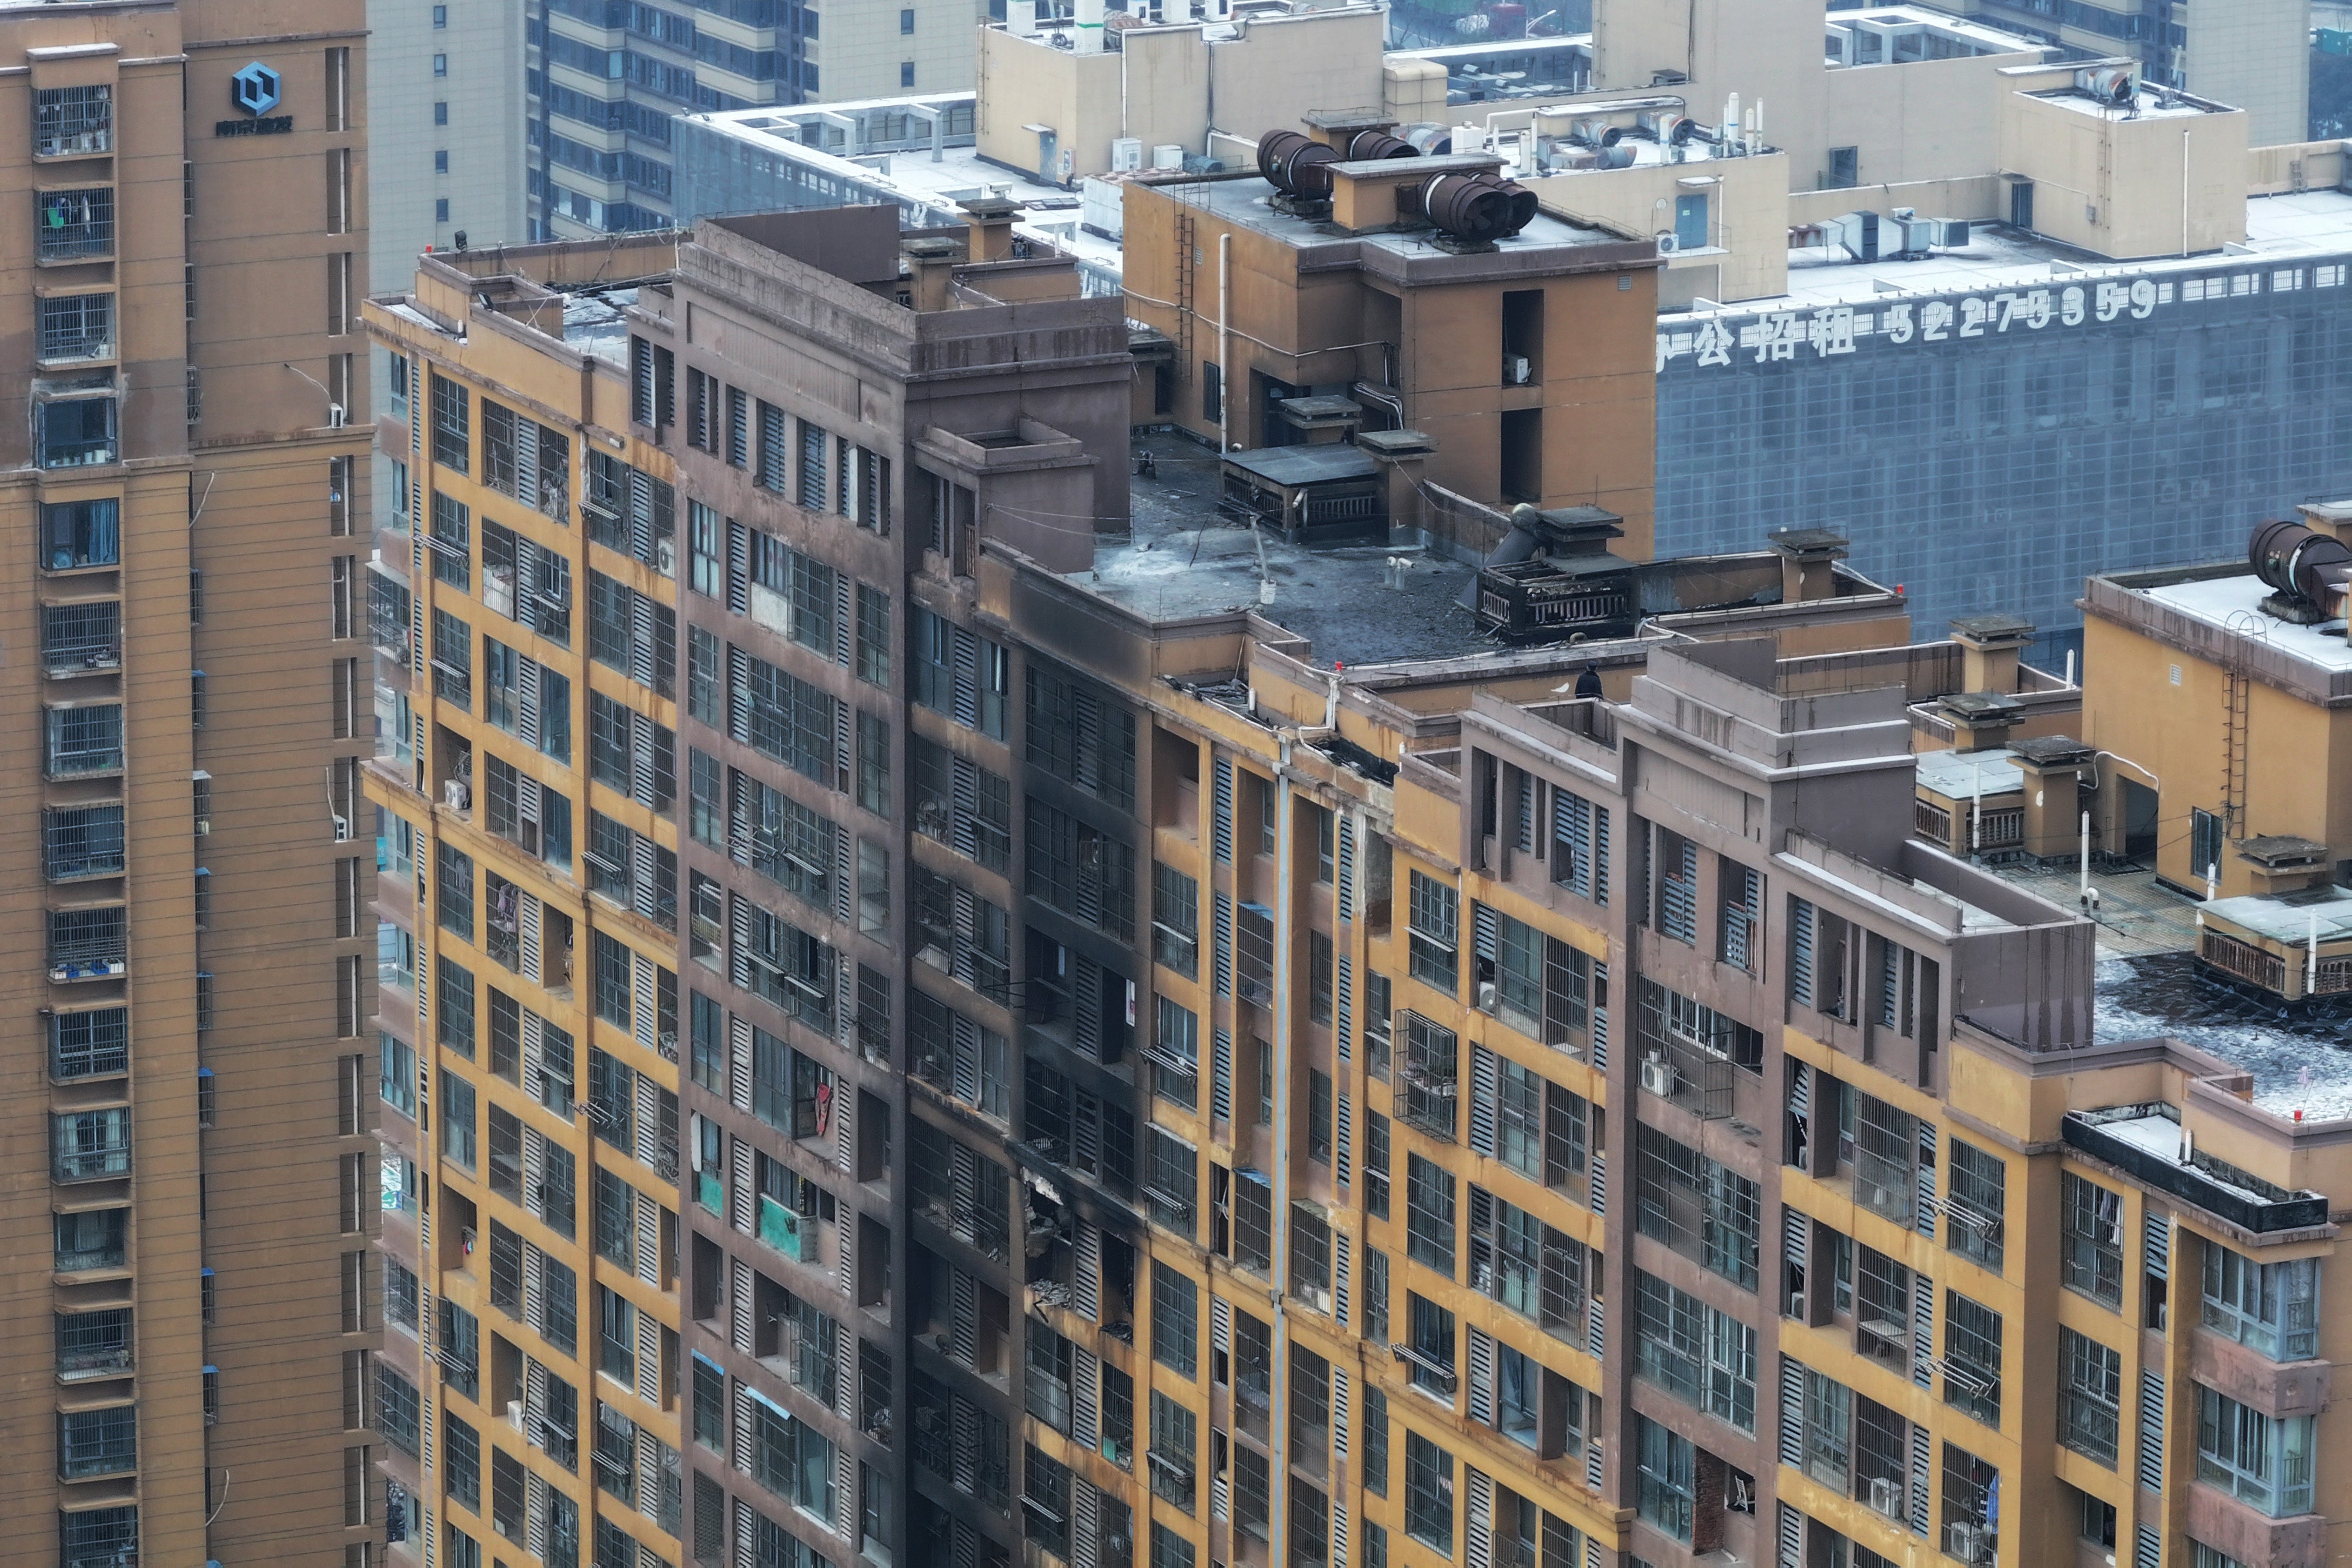 Aerial view of the aftermath of the fire at a residential building in Nanjing city, Jiangsu province on 23 February 2024